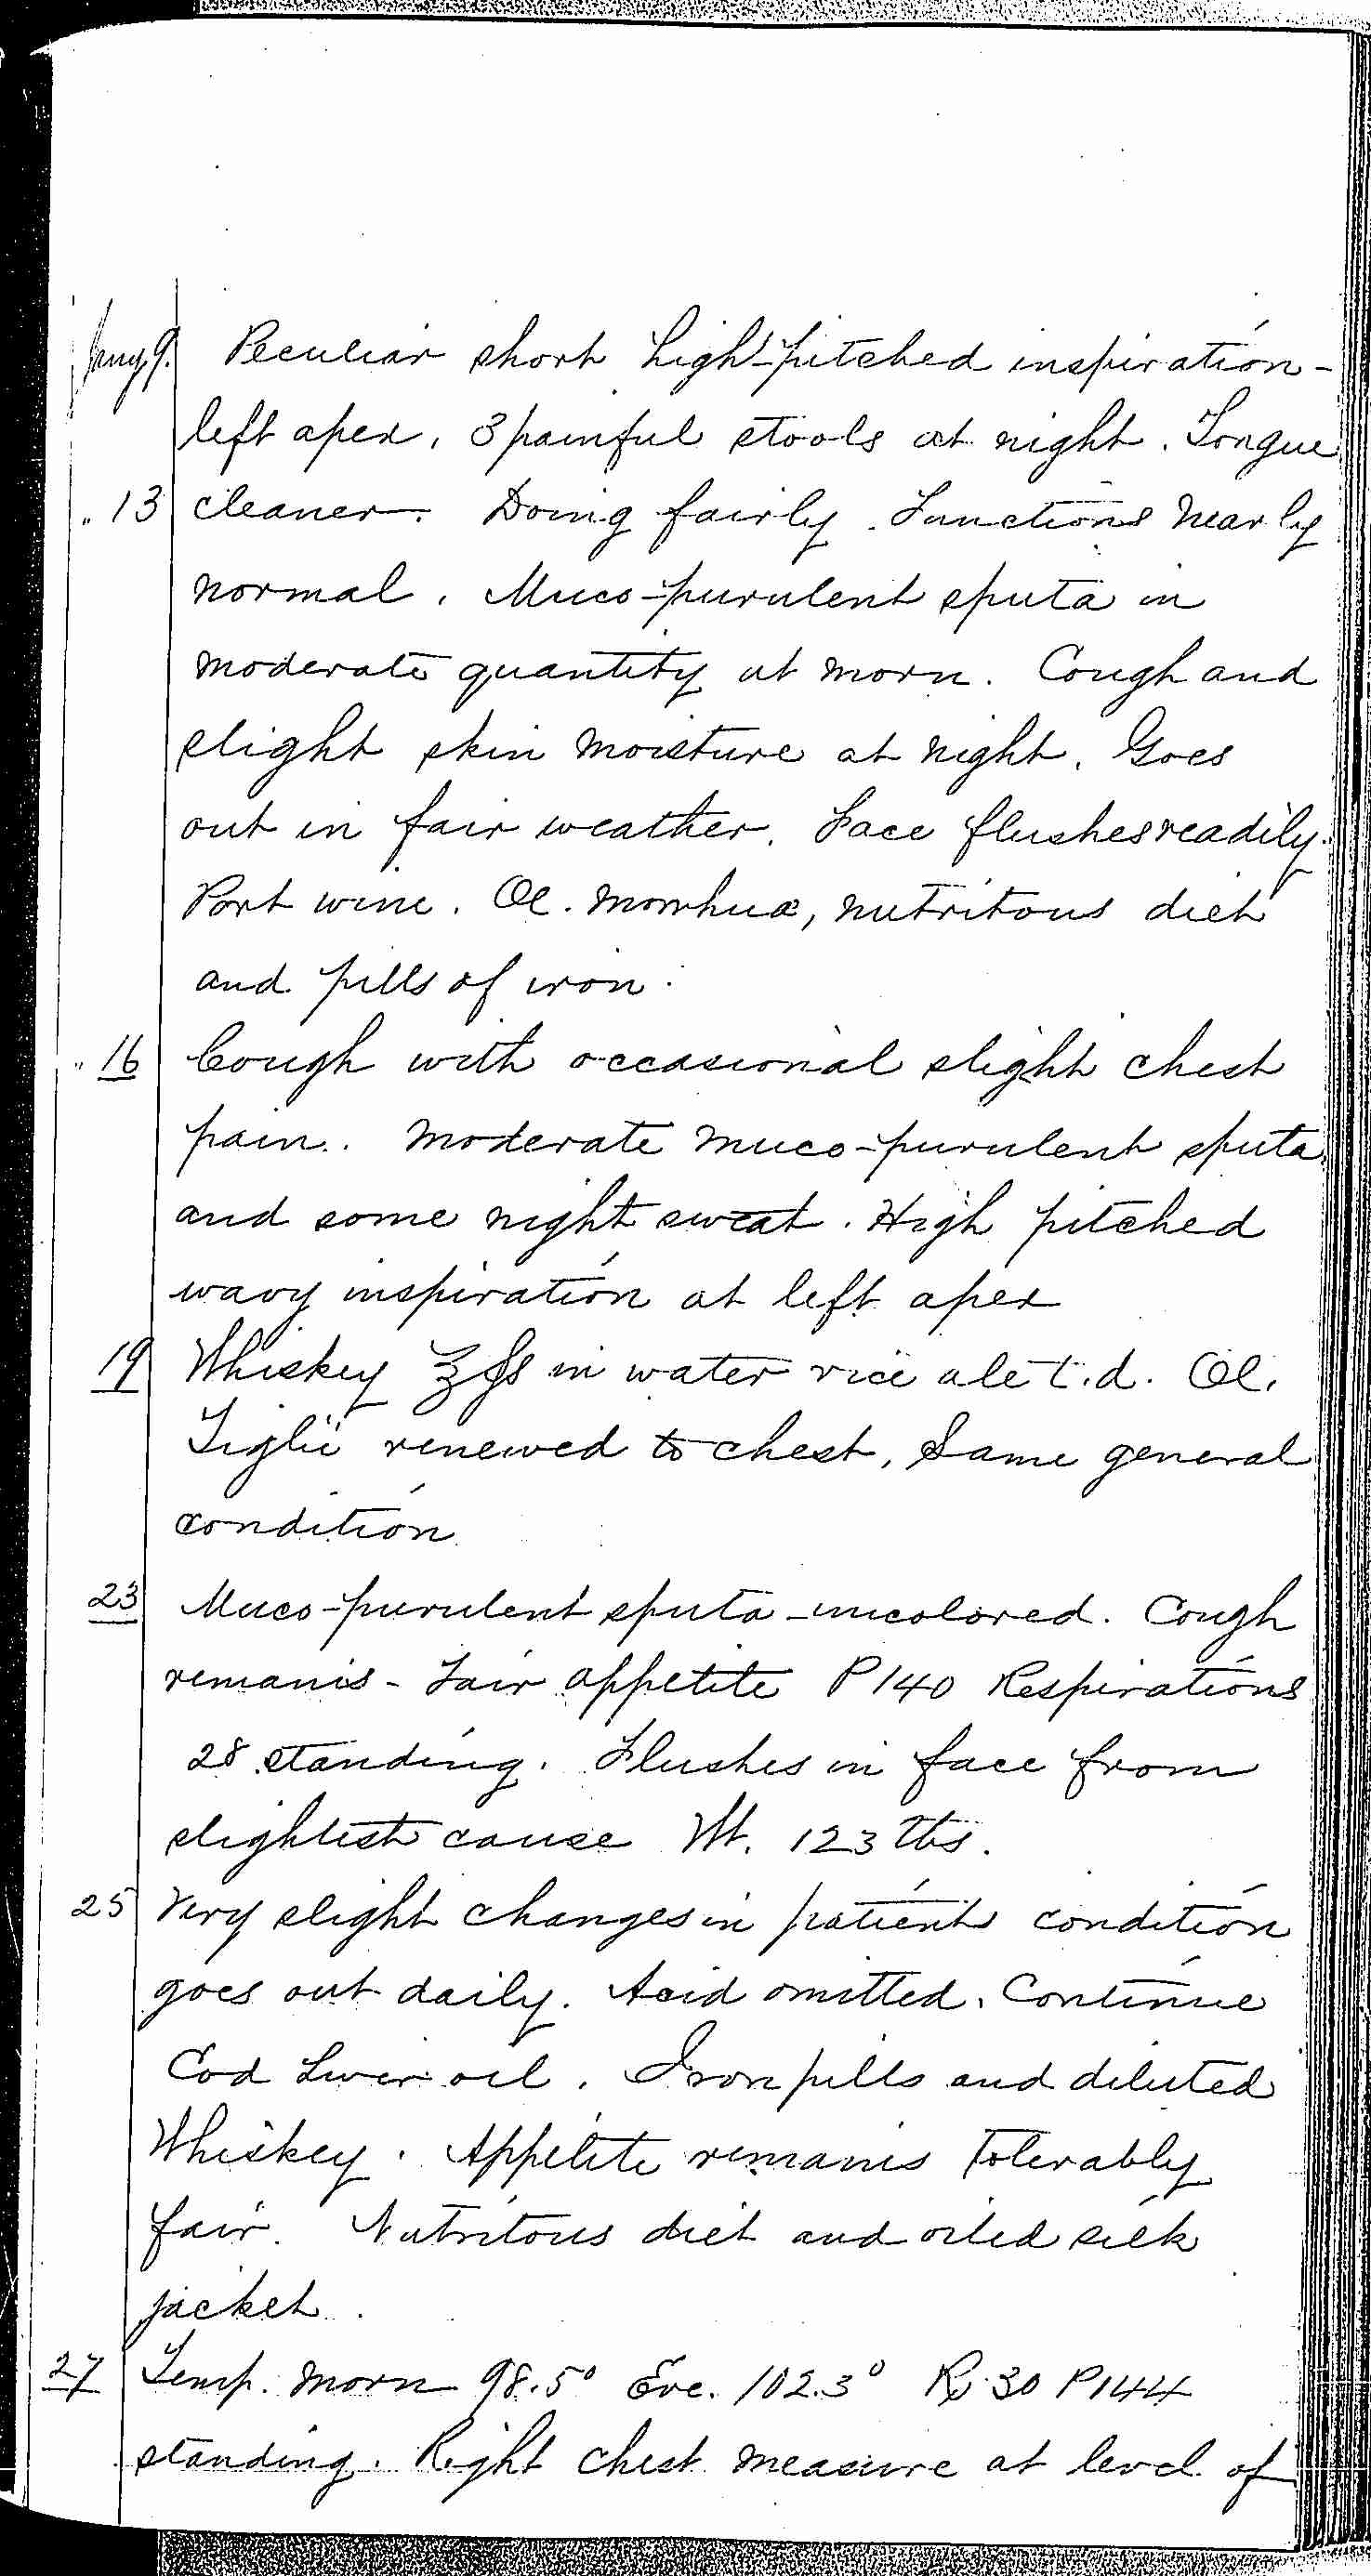 Entry for William Bathwell (page 5 of 13) in the log Hospital Tickets and Case Papers - Naval Hospital - Washington, D.C. - 1868-69